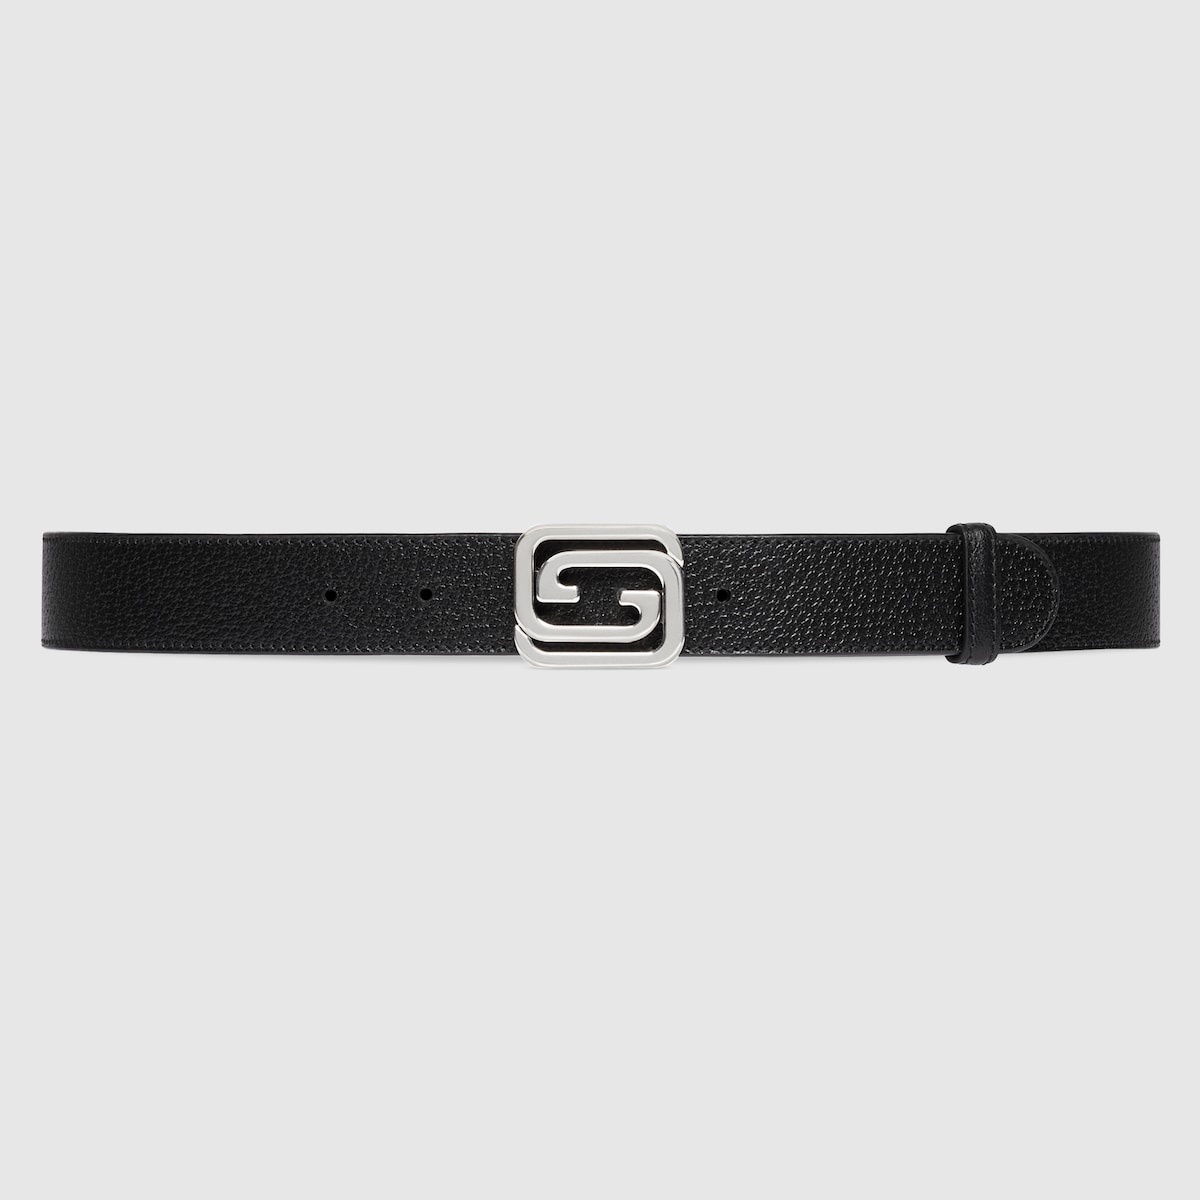 Gucci Reversible Belt with Square G Buckle, Size Gucci 100, Black, Leather